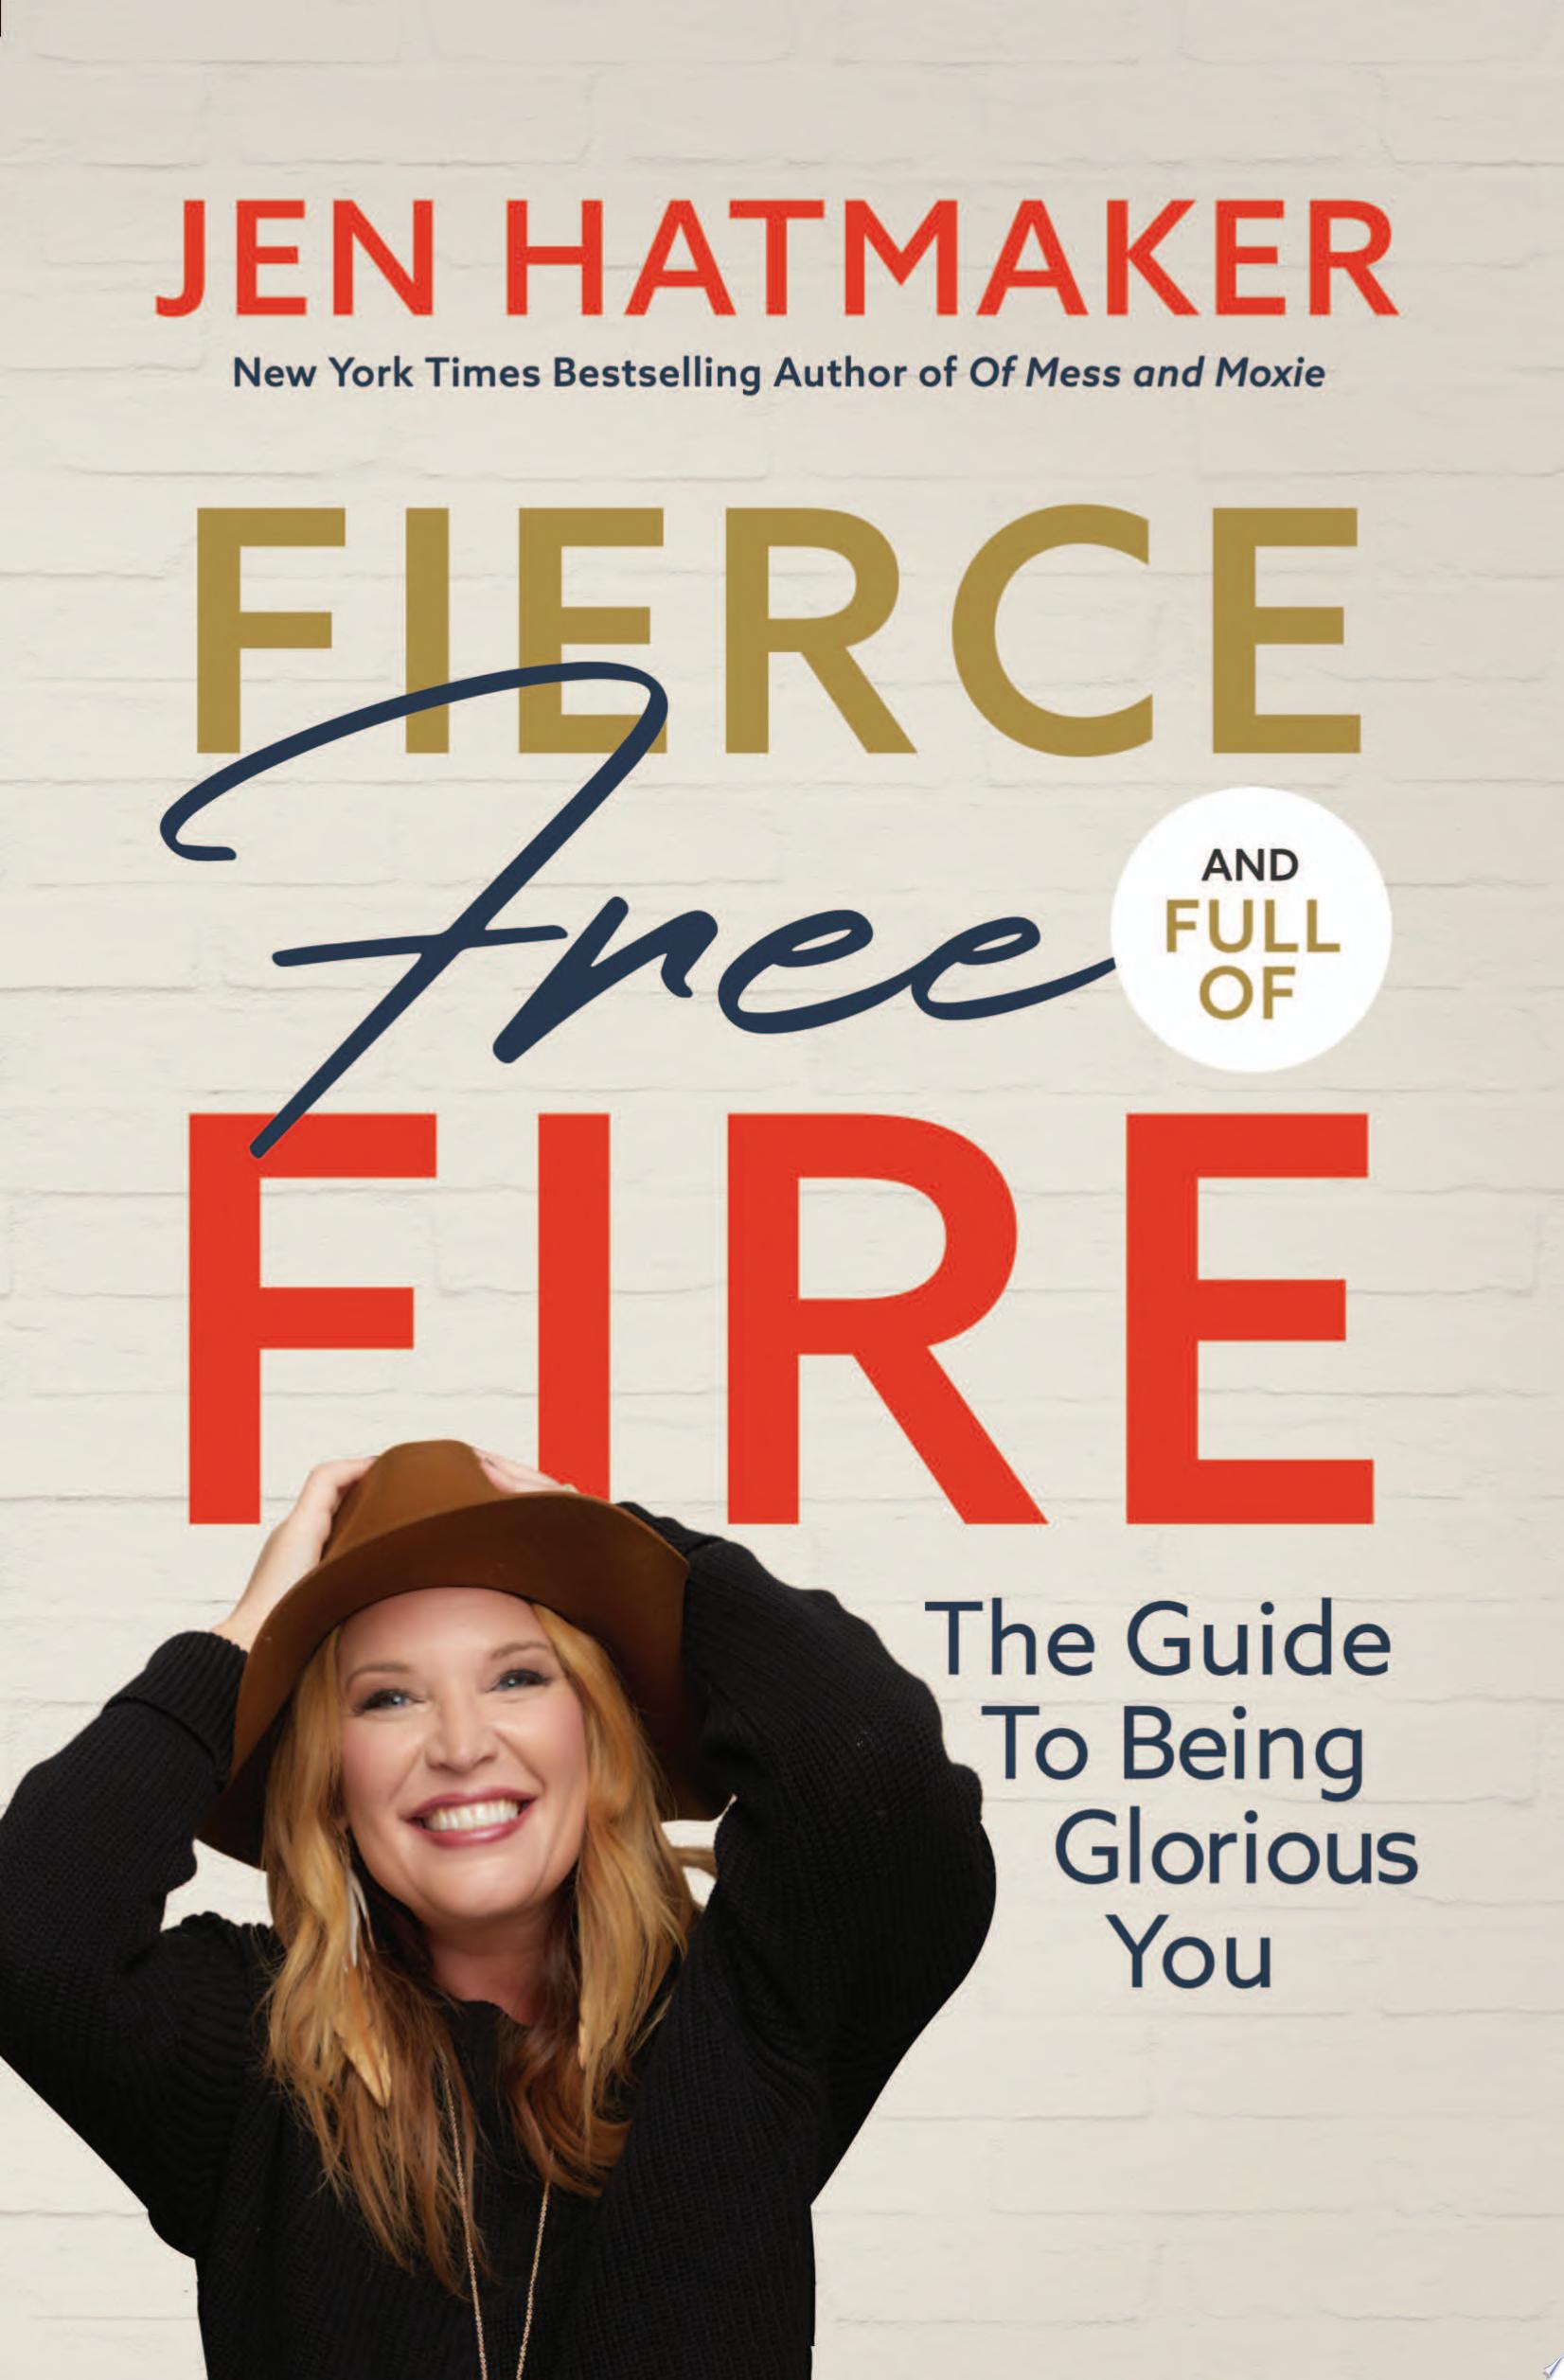 Image for "Fierce, Free, and Full of Fire"